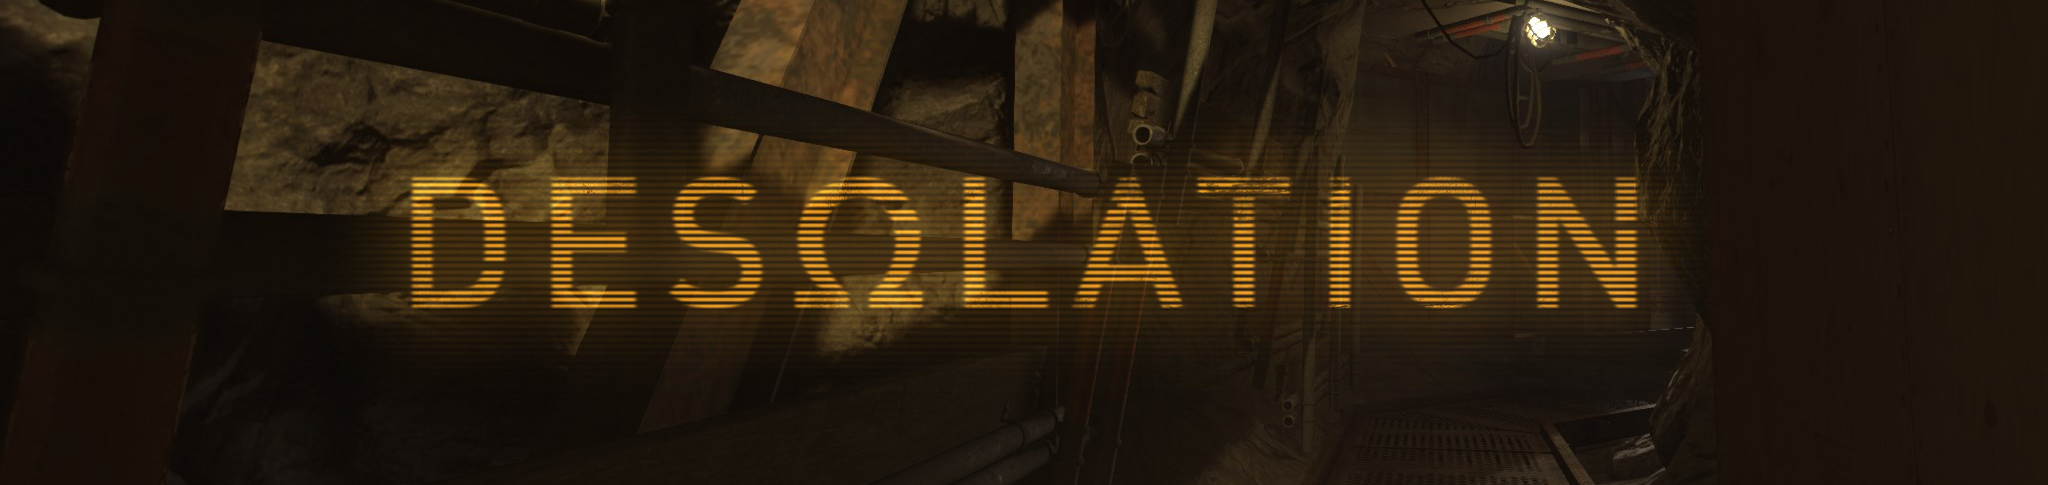 A header image with the logo for Desolation.